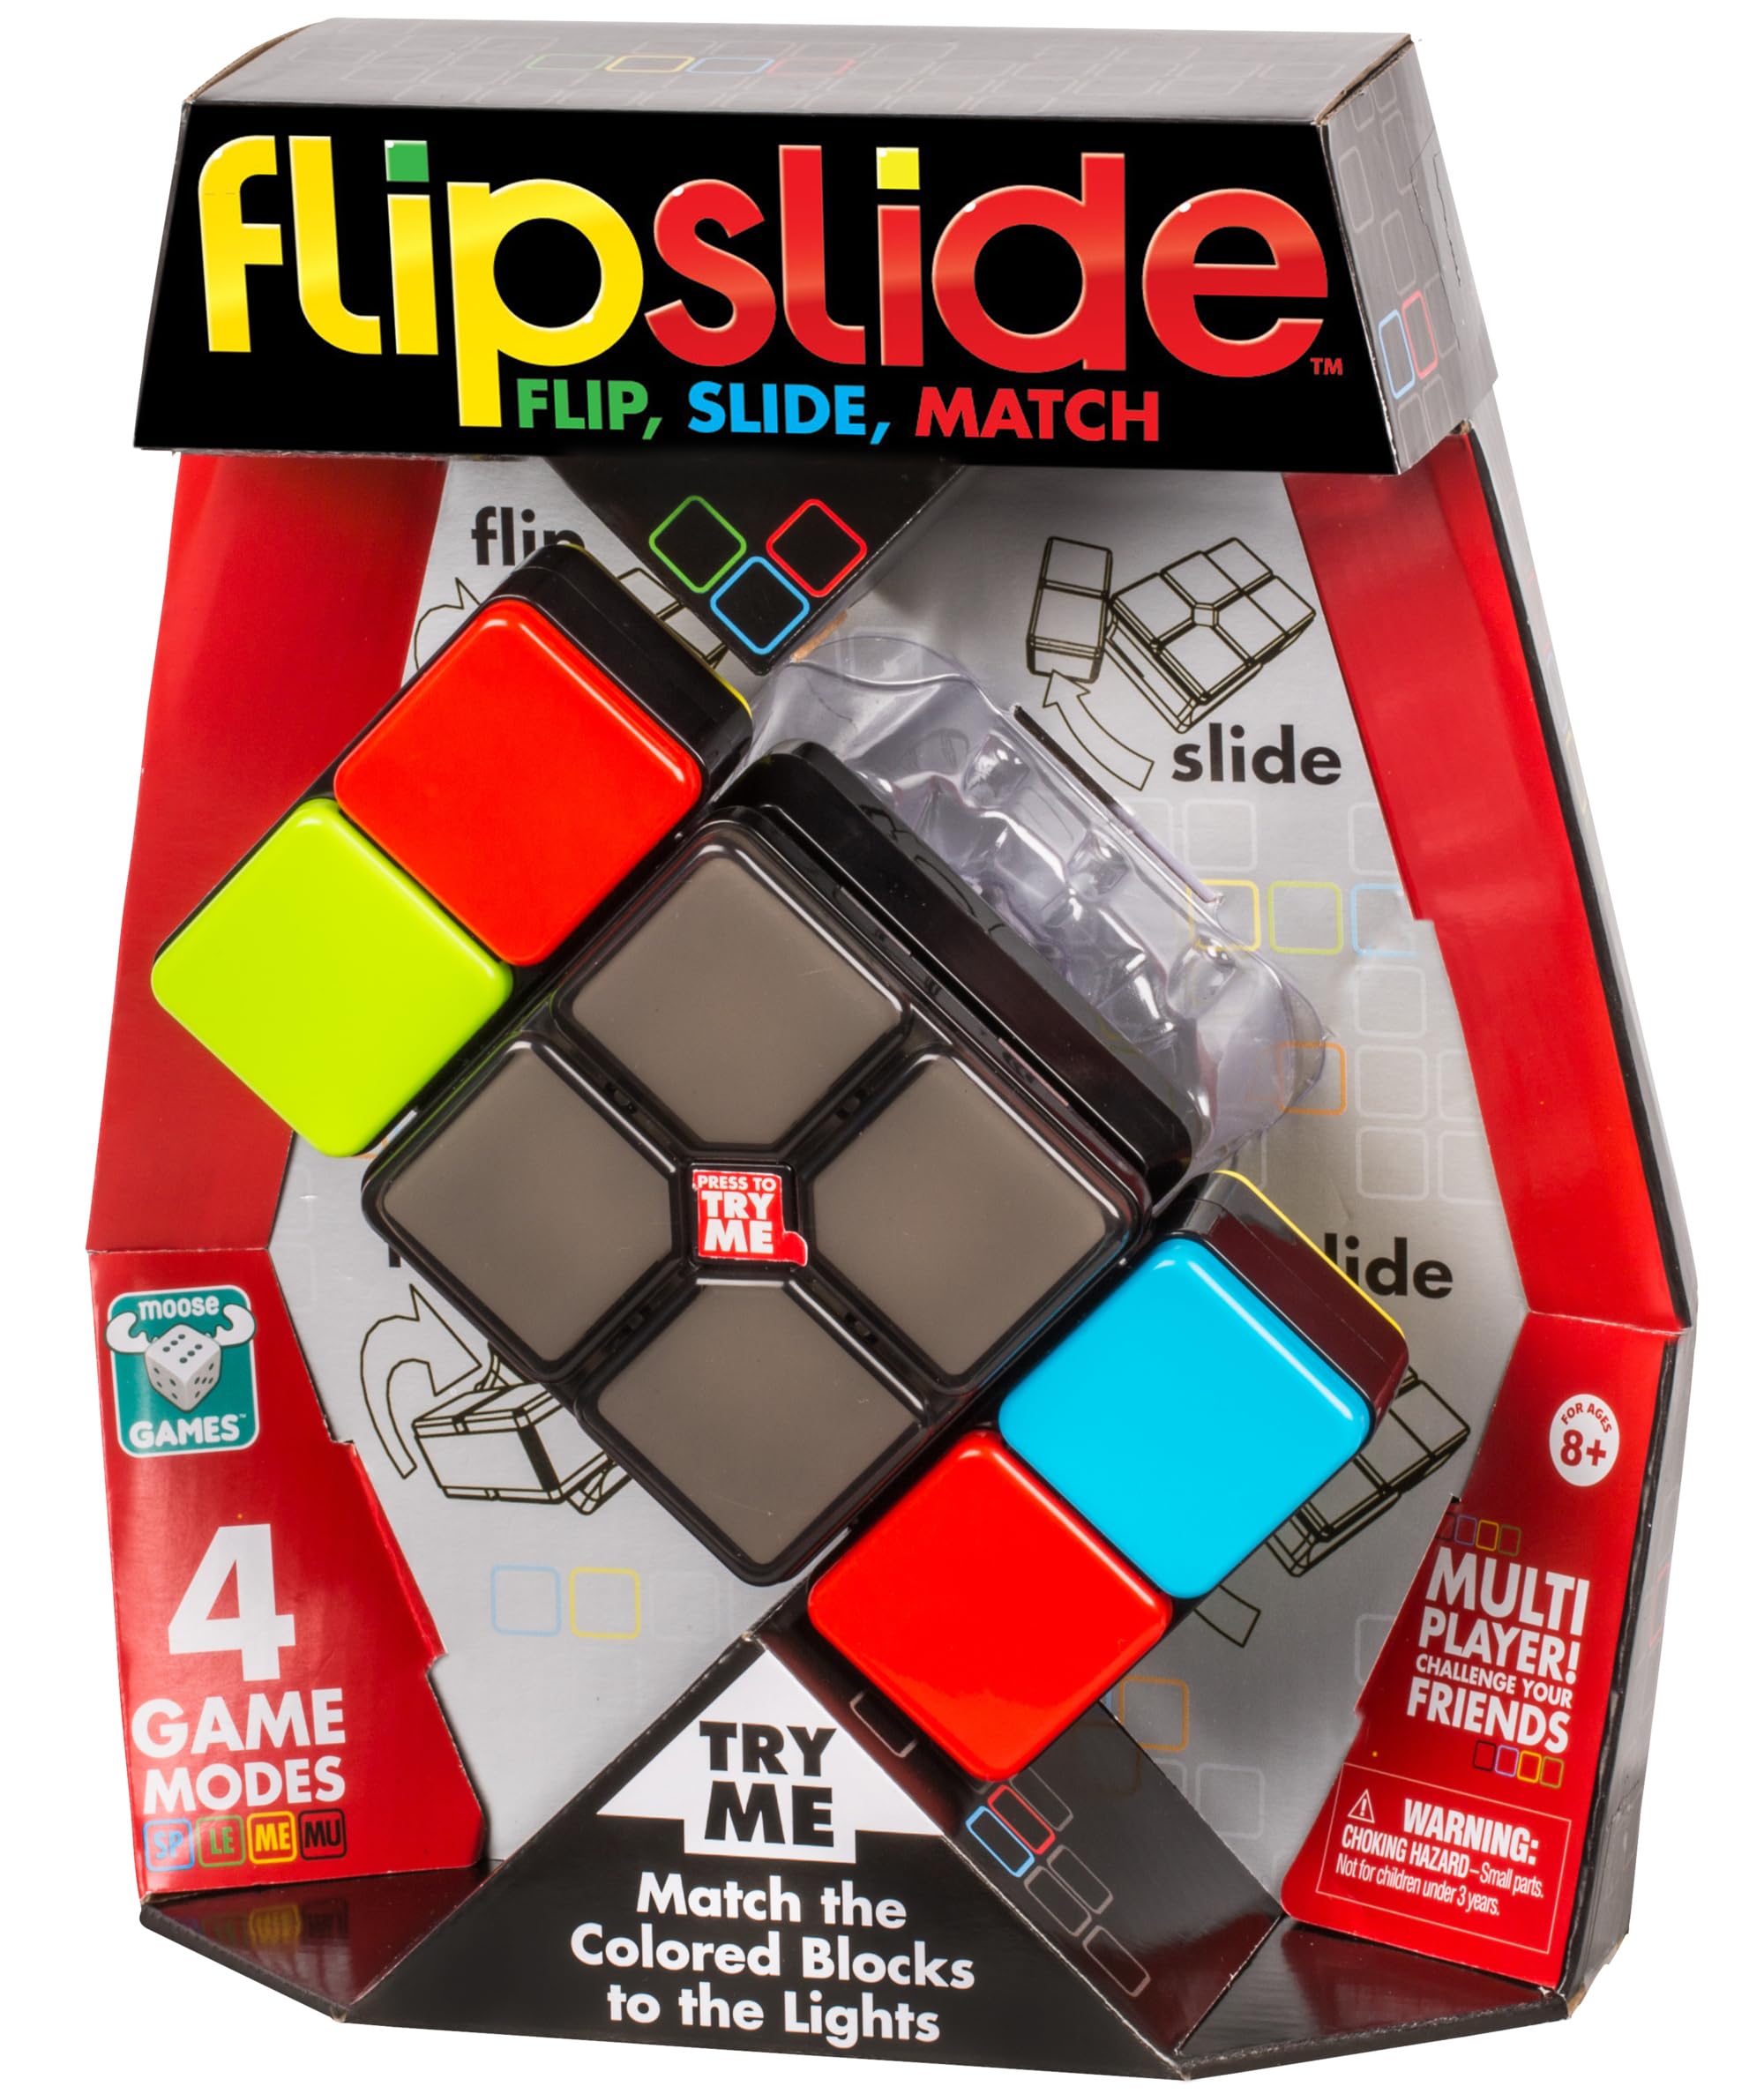 Oonies Flipslide Game, Electronic Handheld Game | Flip, Slide, and Match the Colors to Beat the Clock - 4 Game Modes - Multiplayer Fun,Black,3.23'' x 8.66'' x 10.28''